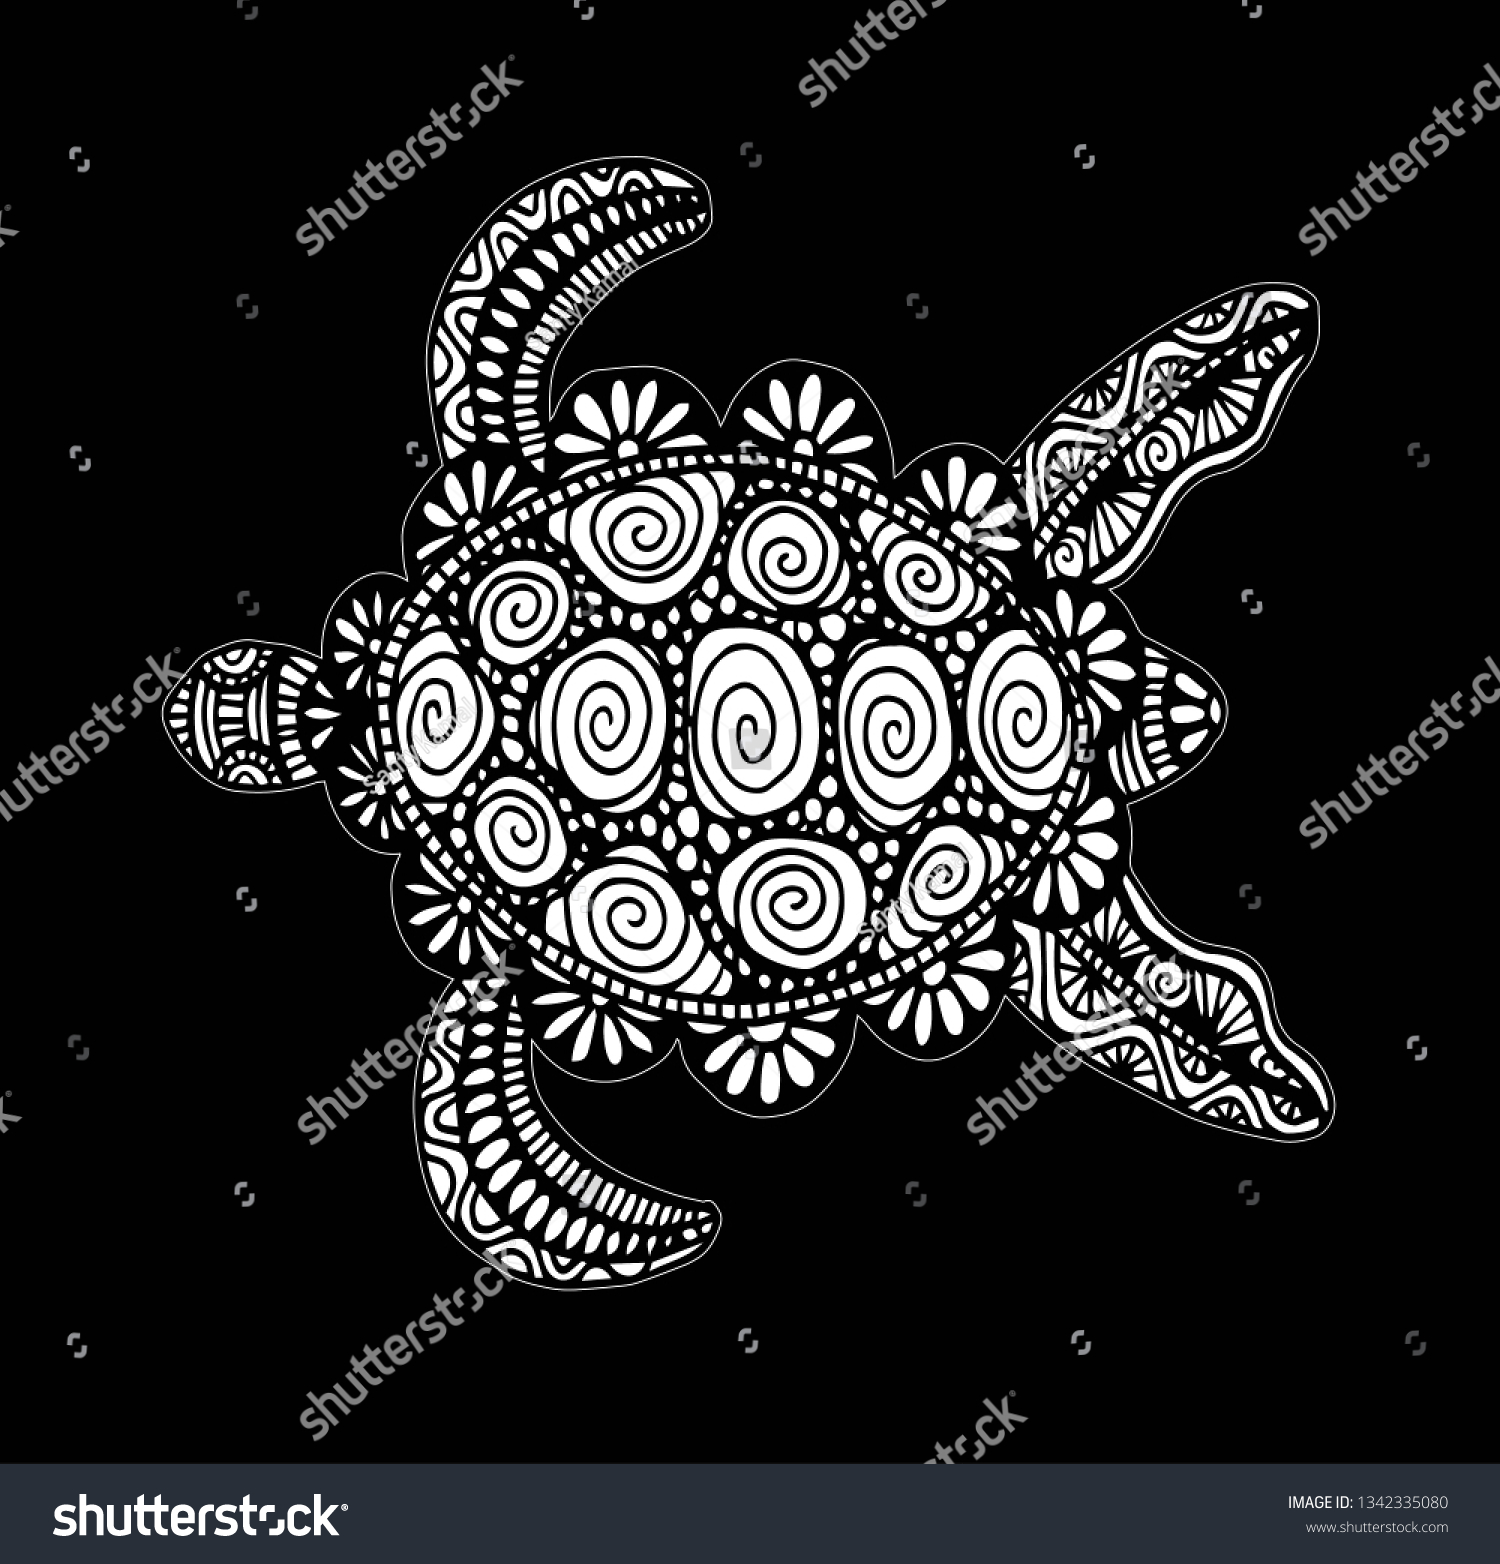 SVG of Turtle coloring book for adults vector illustration. Anti-stress coloring for adult. Zentangle style. Black and white lines, hand drawing svg